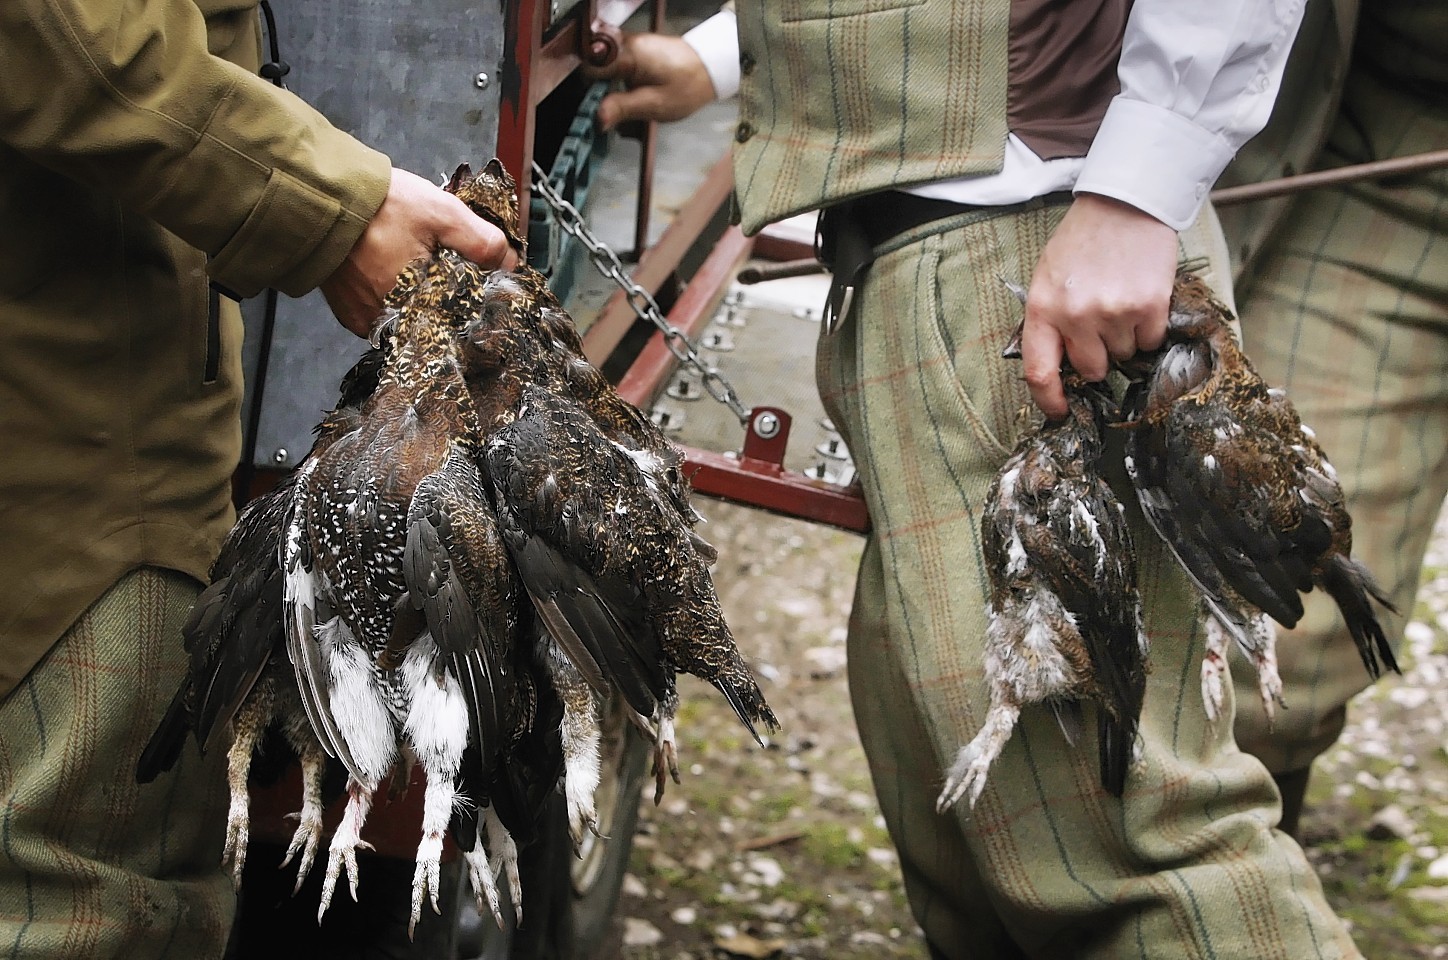 The economic benefits of grouse moors were explored in the report.